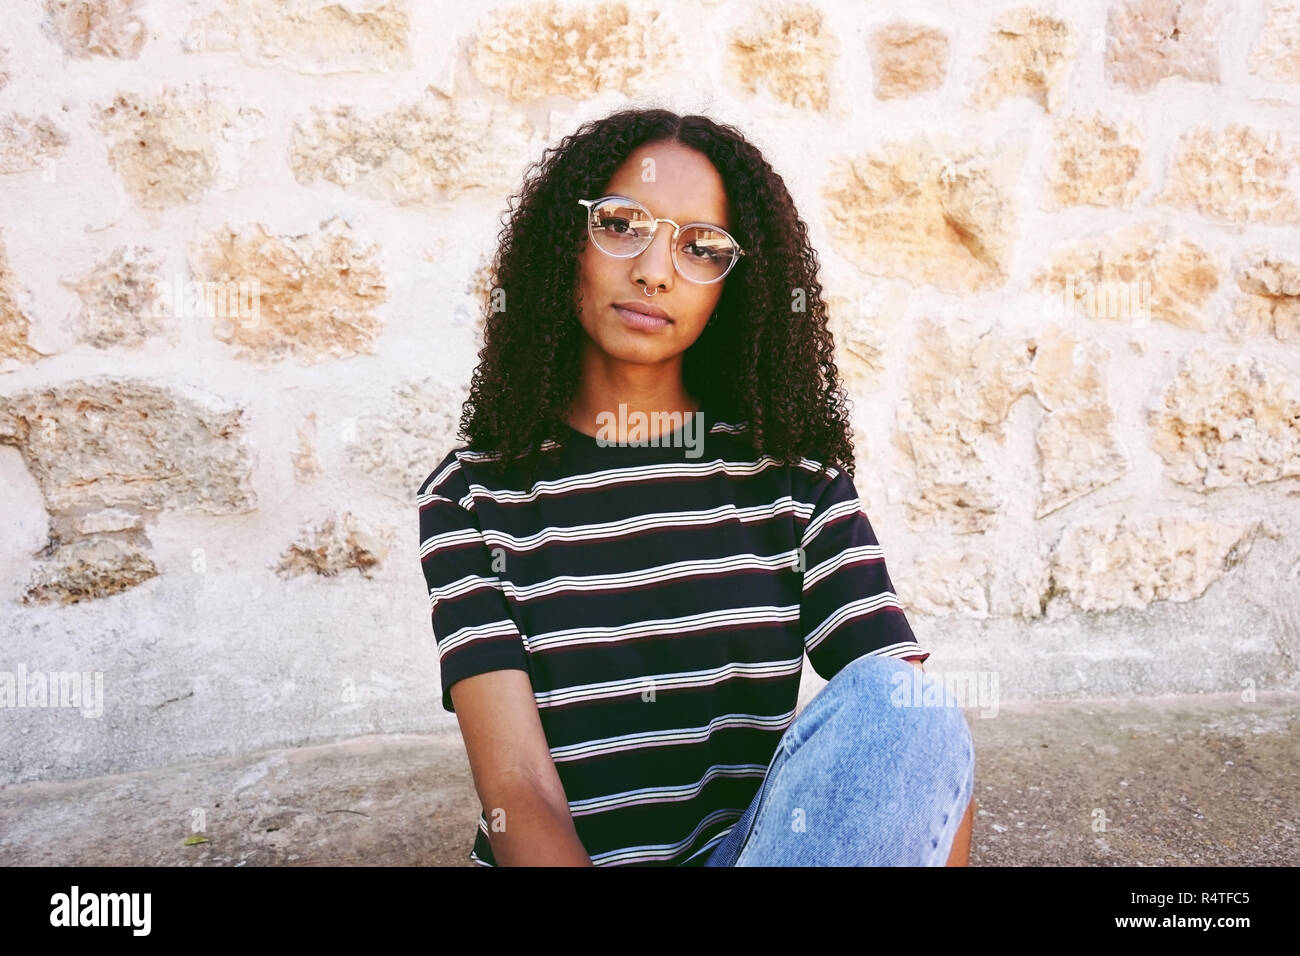 Young Black Woman Wearing Glasses High Resolution Stock Photography and  Images - Alamy